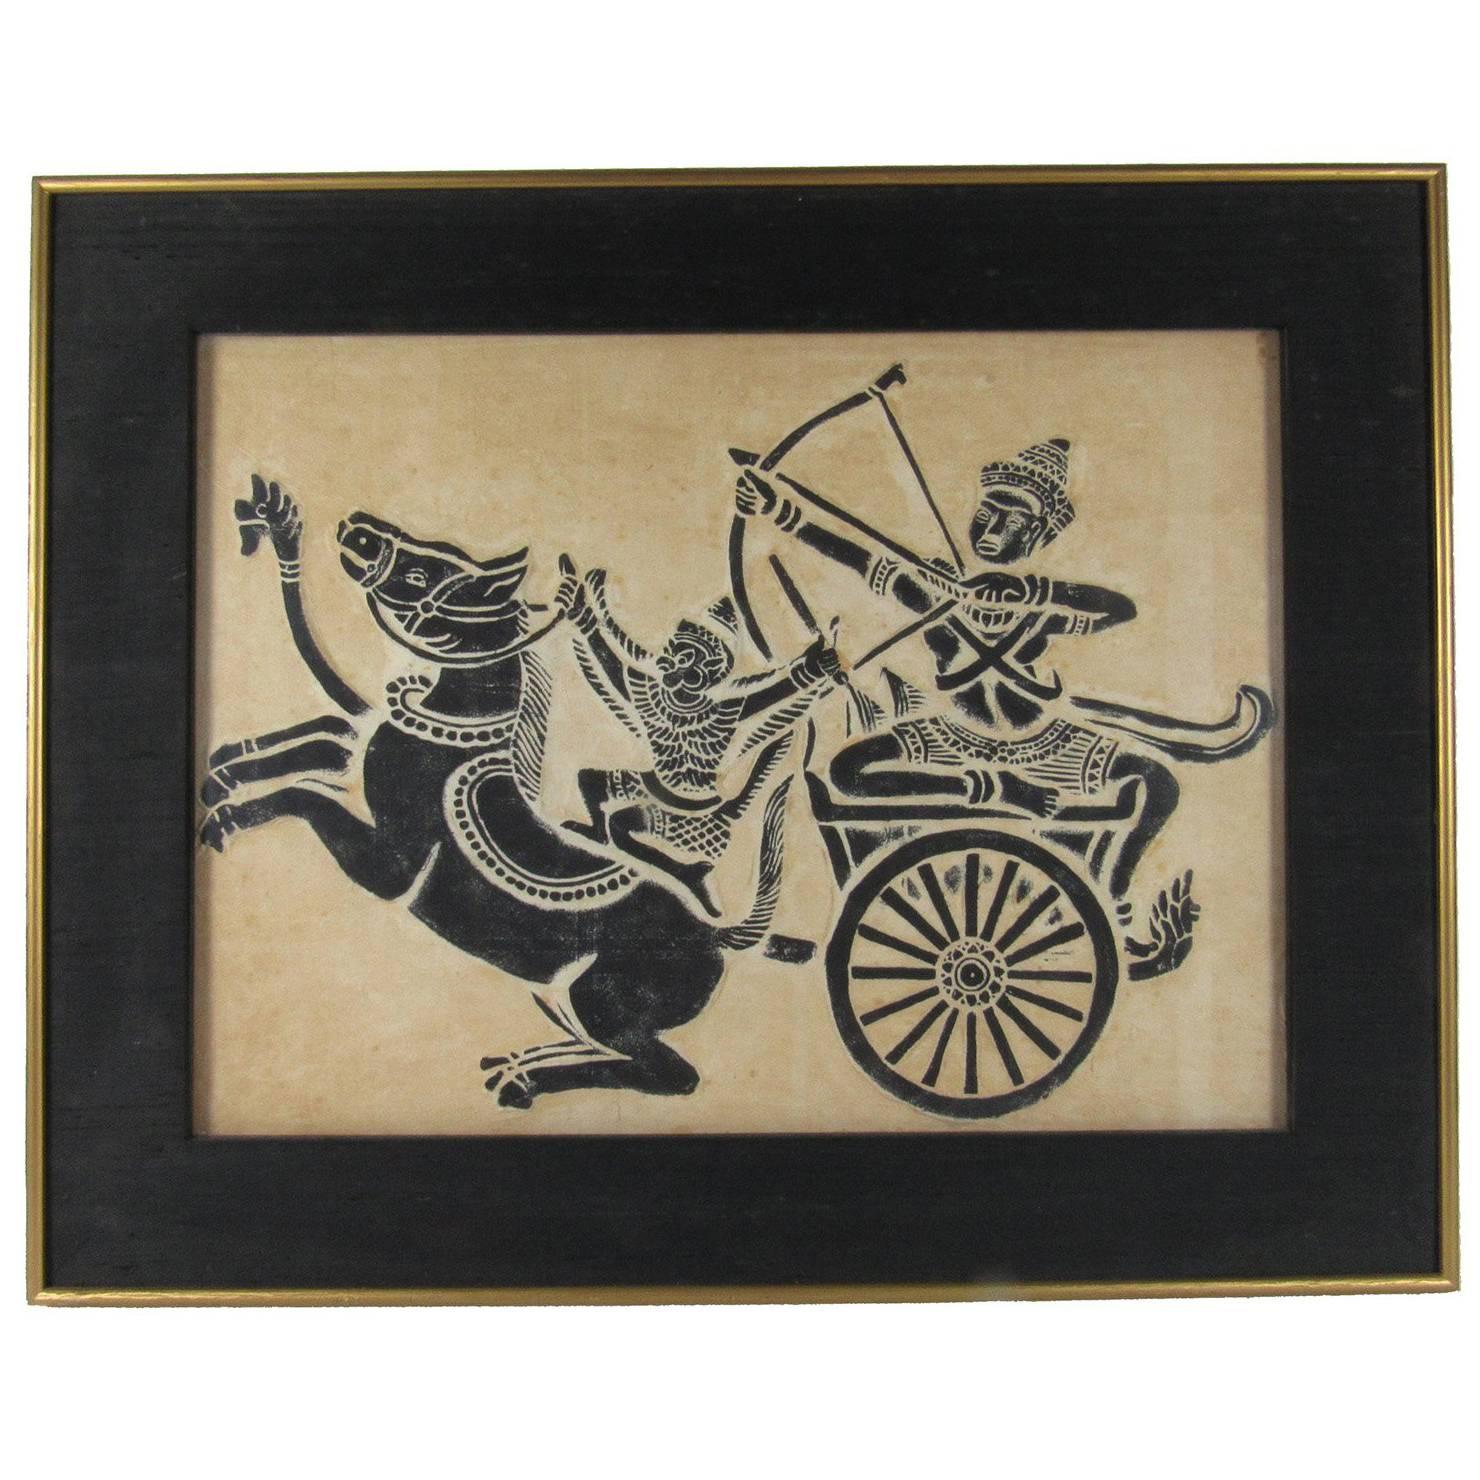 Thai Temple Rubbing on Handmade Paper Depicting Warriors in a Chariot